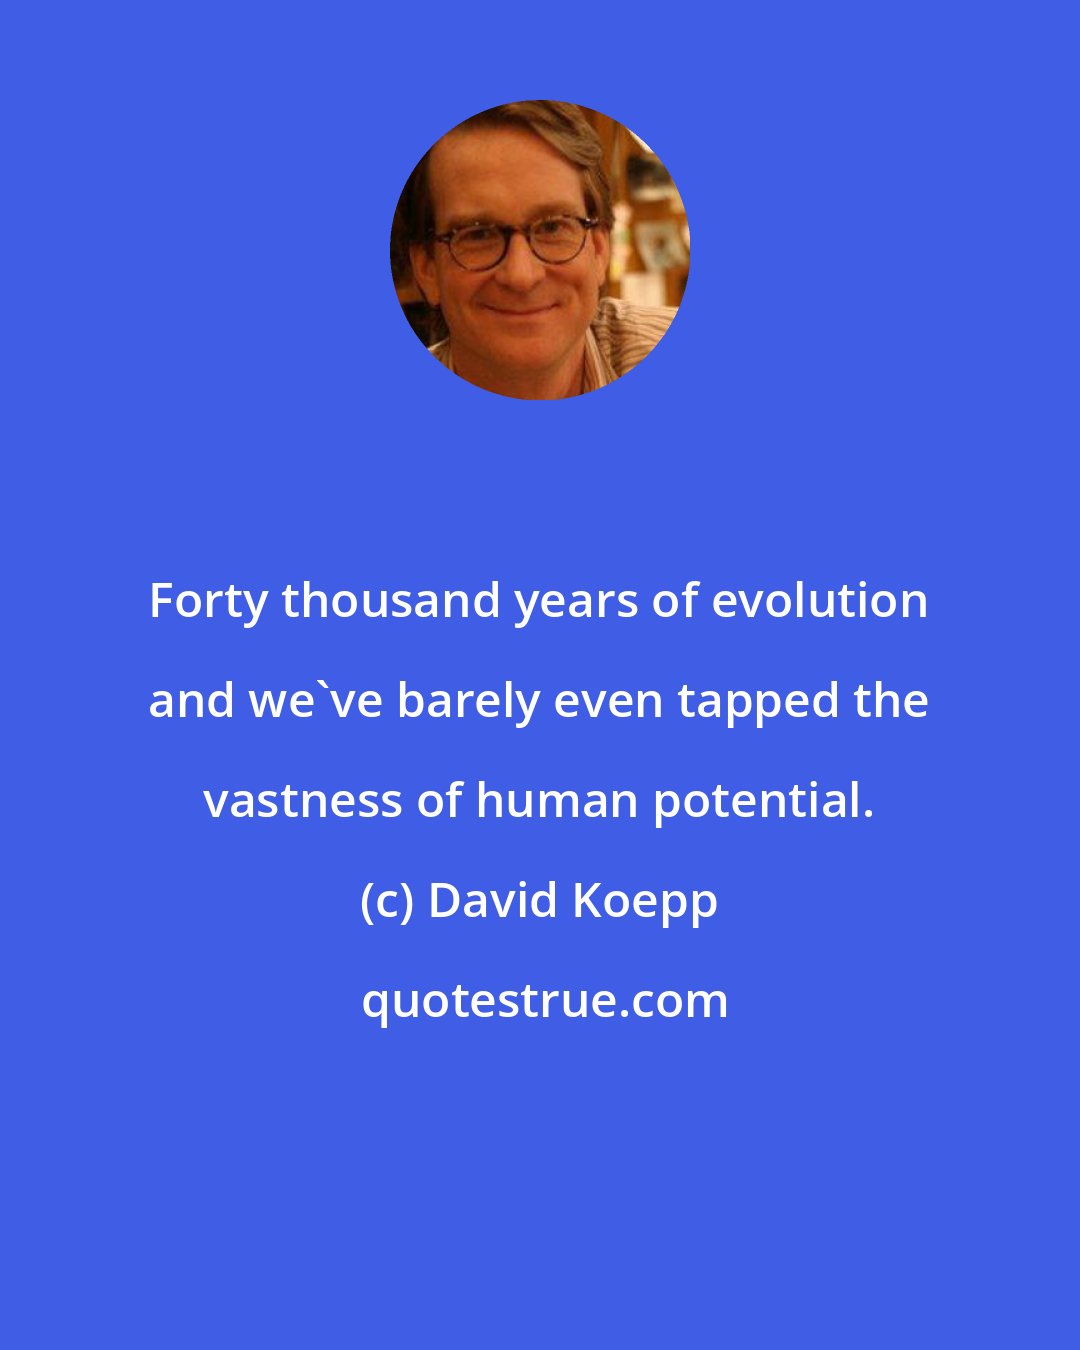 David Koepp: Forty thousand years of evolution and we've barely even tapped the vastness of human potential.